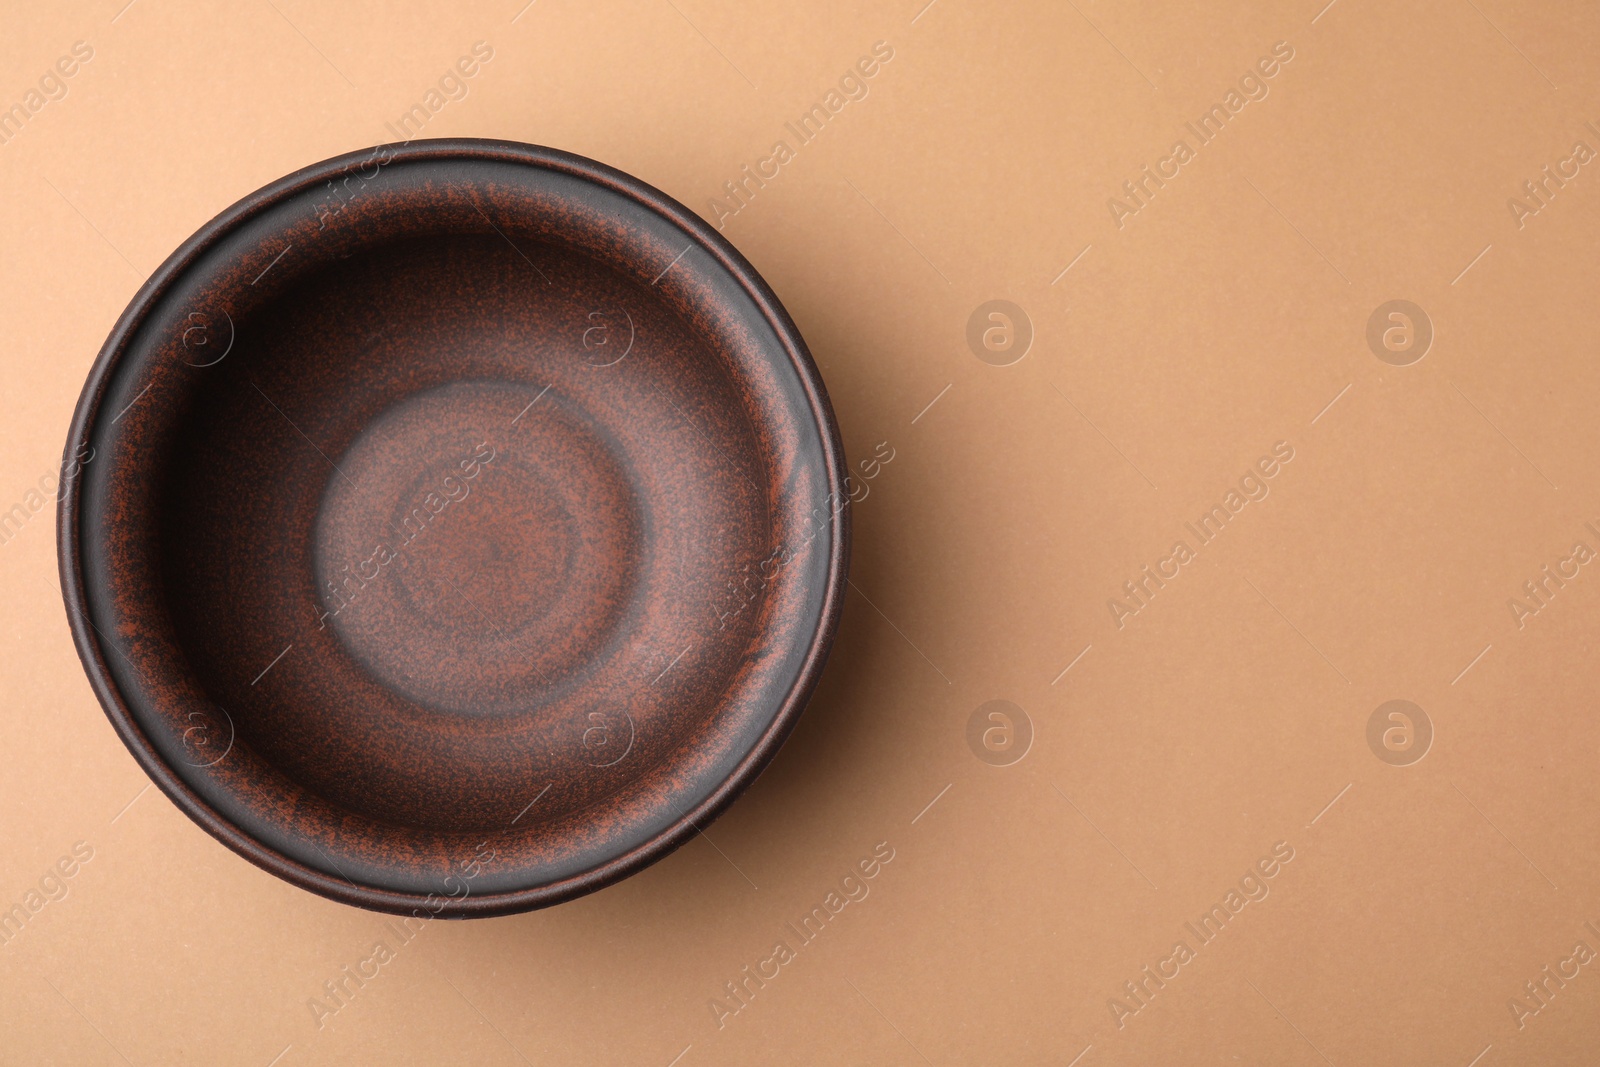 Photo of Ceramic bowl on beige background, top view. Space for text